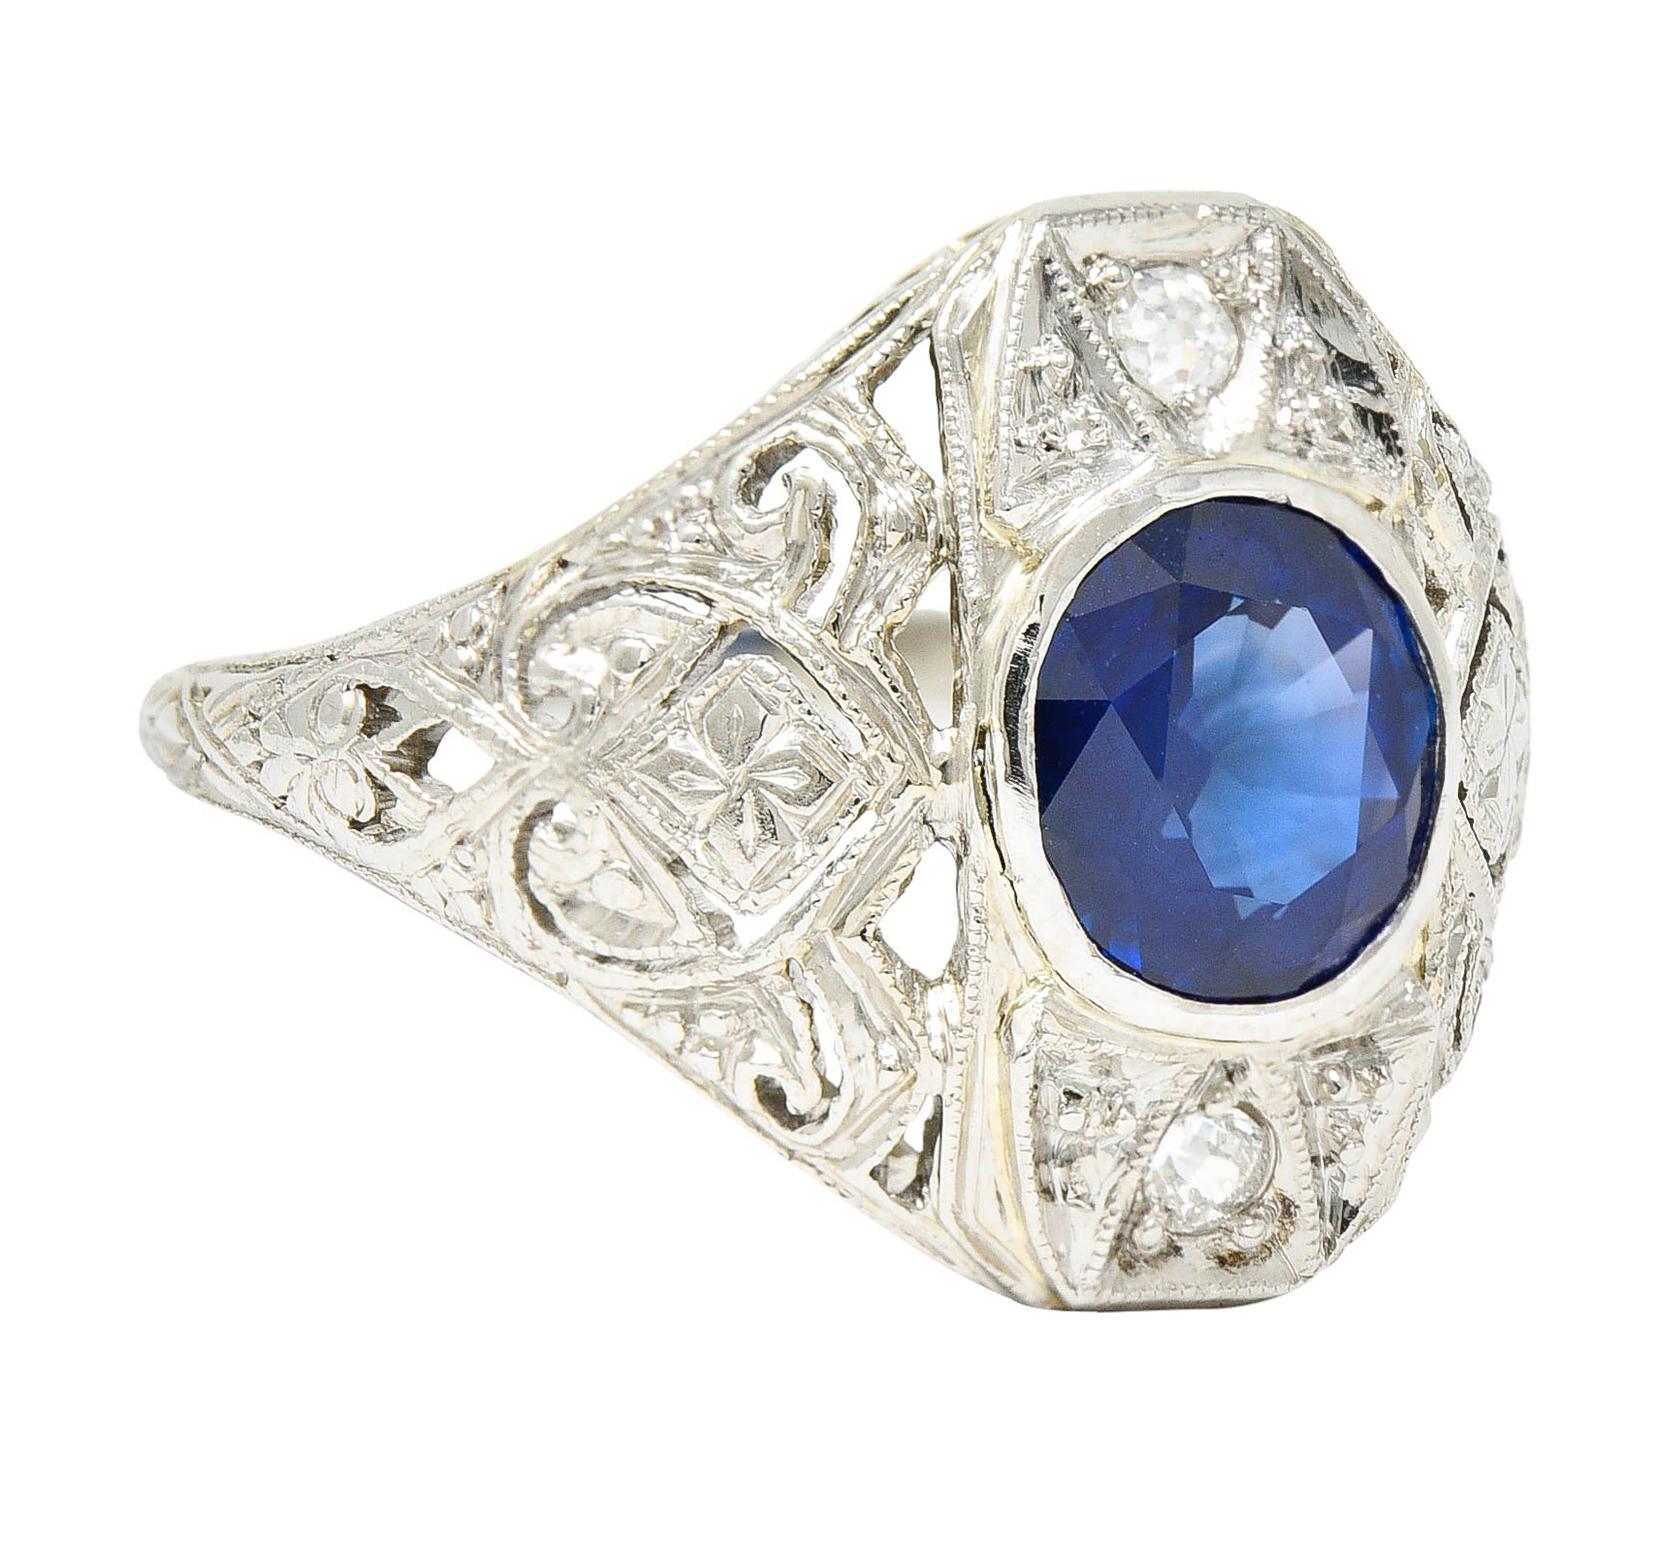 Platinum-topped mounting features a geometric and gemmed center station

With heart inspired shoulders and deeply engraved fully around the shank with foliate; white gold

Centering a bezel set oval cut sapphire weighing approximately 1.40